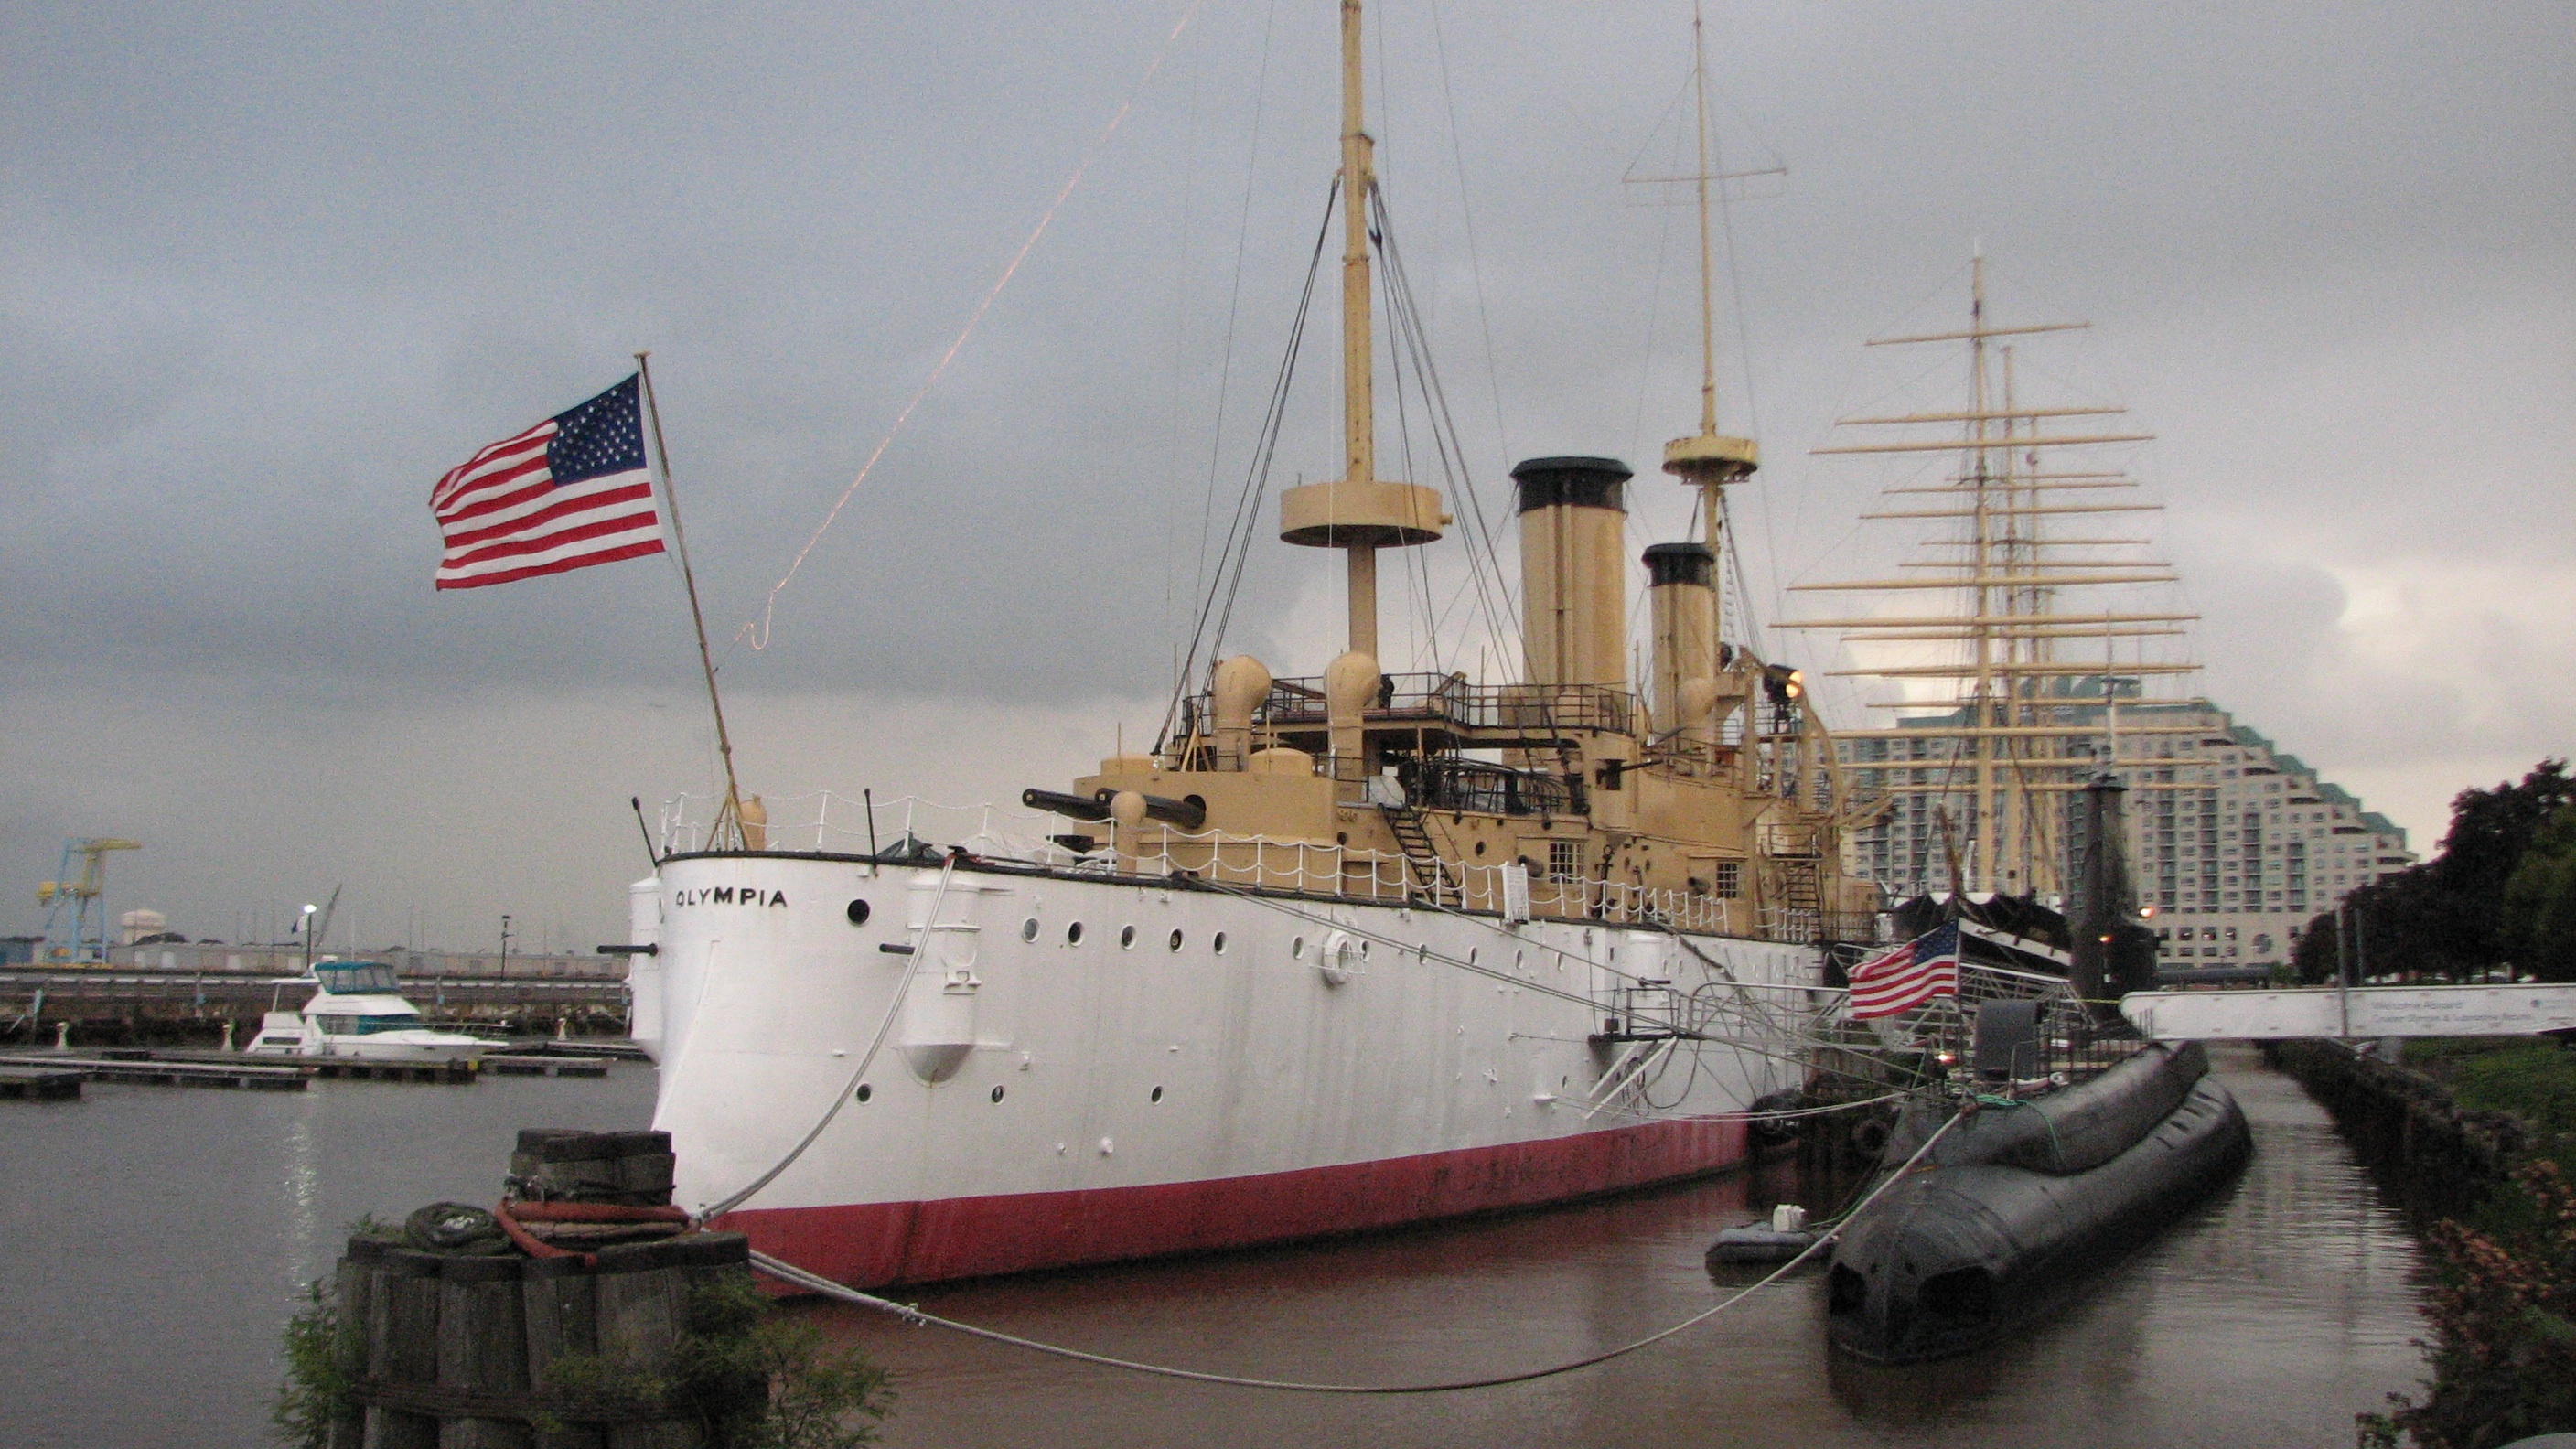 The Cruiser Olympia is in need of $10 million to tow her from Penn's Landing to dry dock and $10 million to repair her hull.